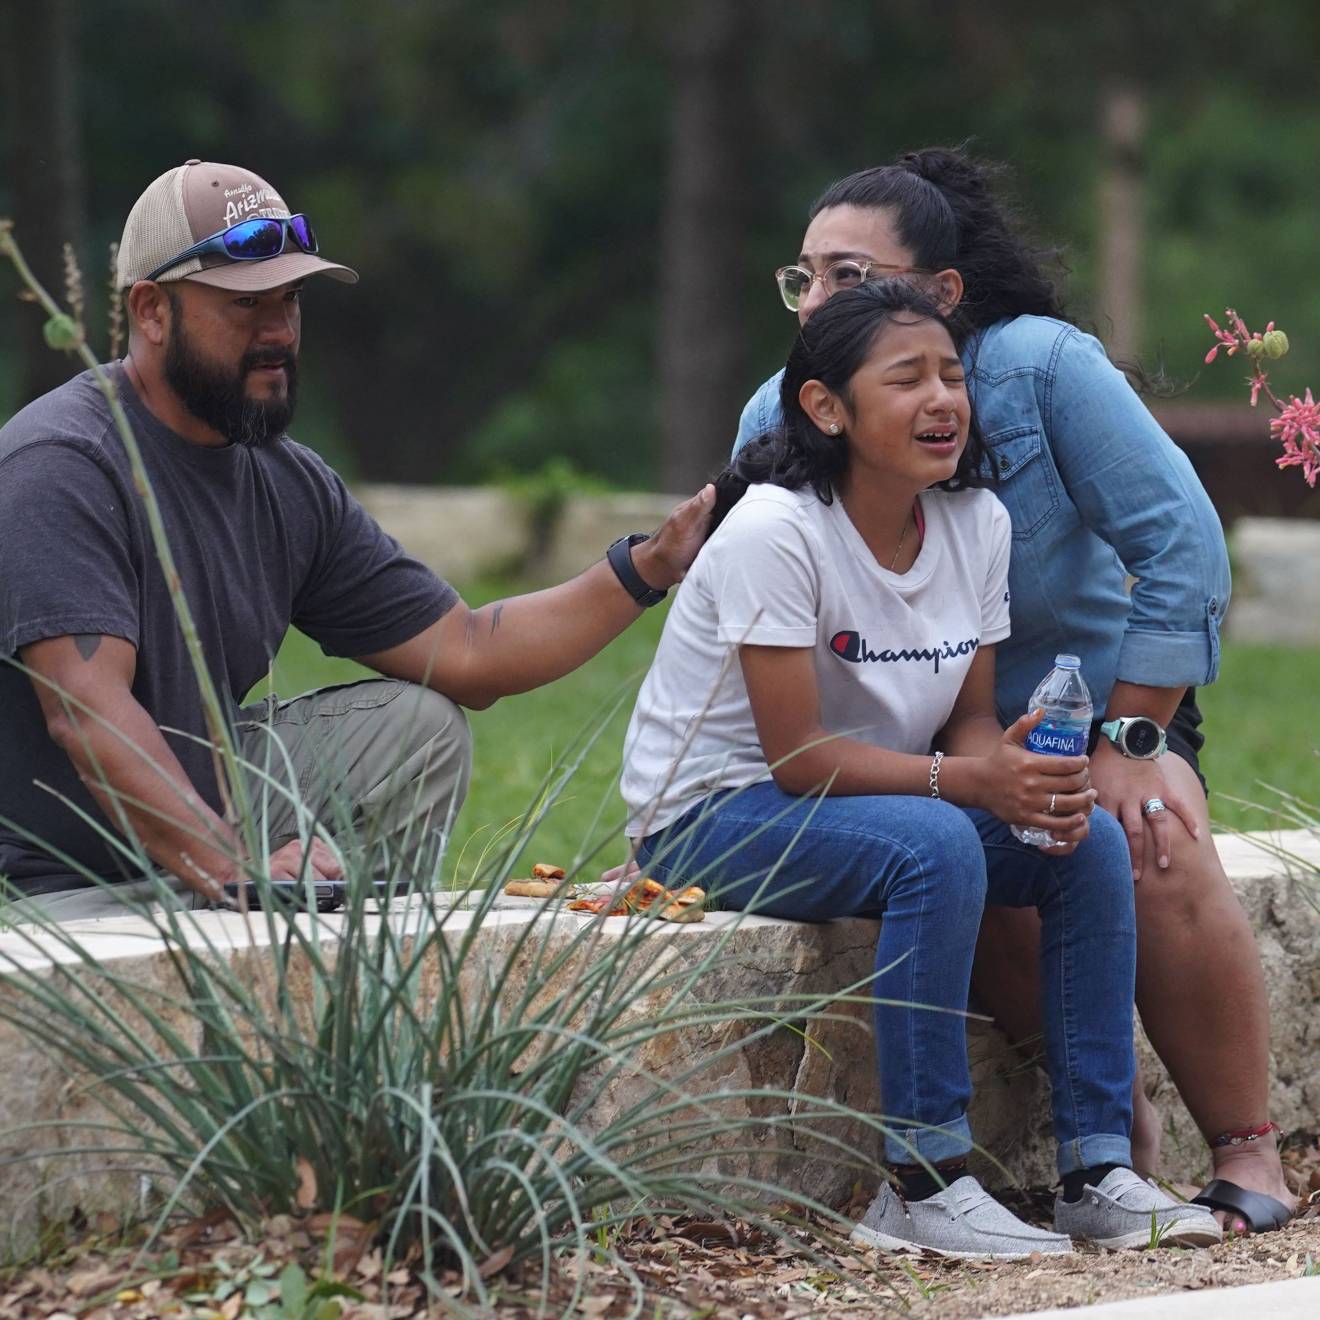 A girl cries outside the Willie de Leon Civic Center in Uvalde, Texas, on May 24, 2022, surrounded by two adults